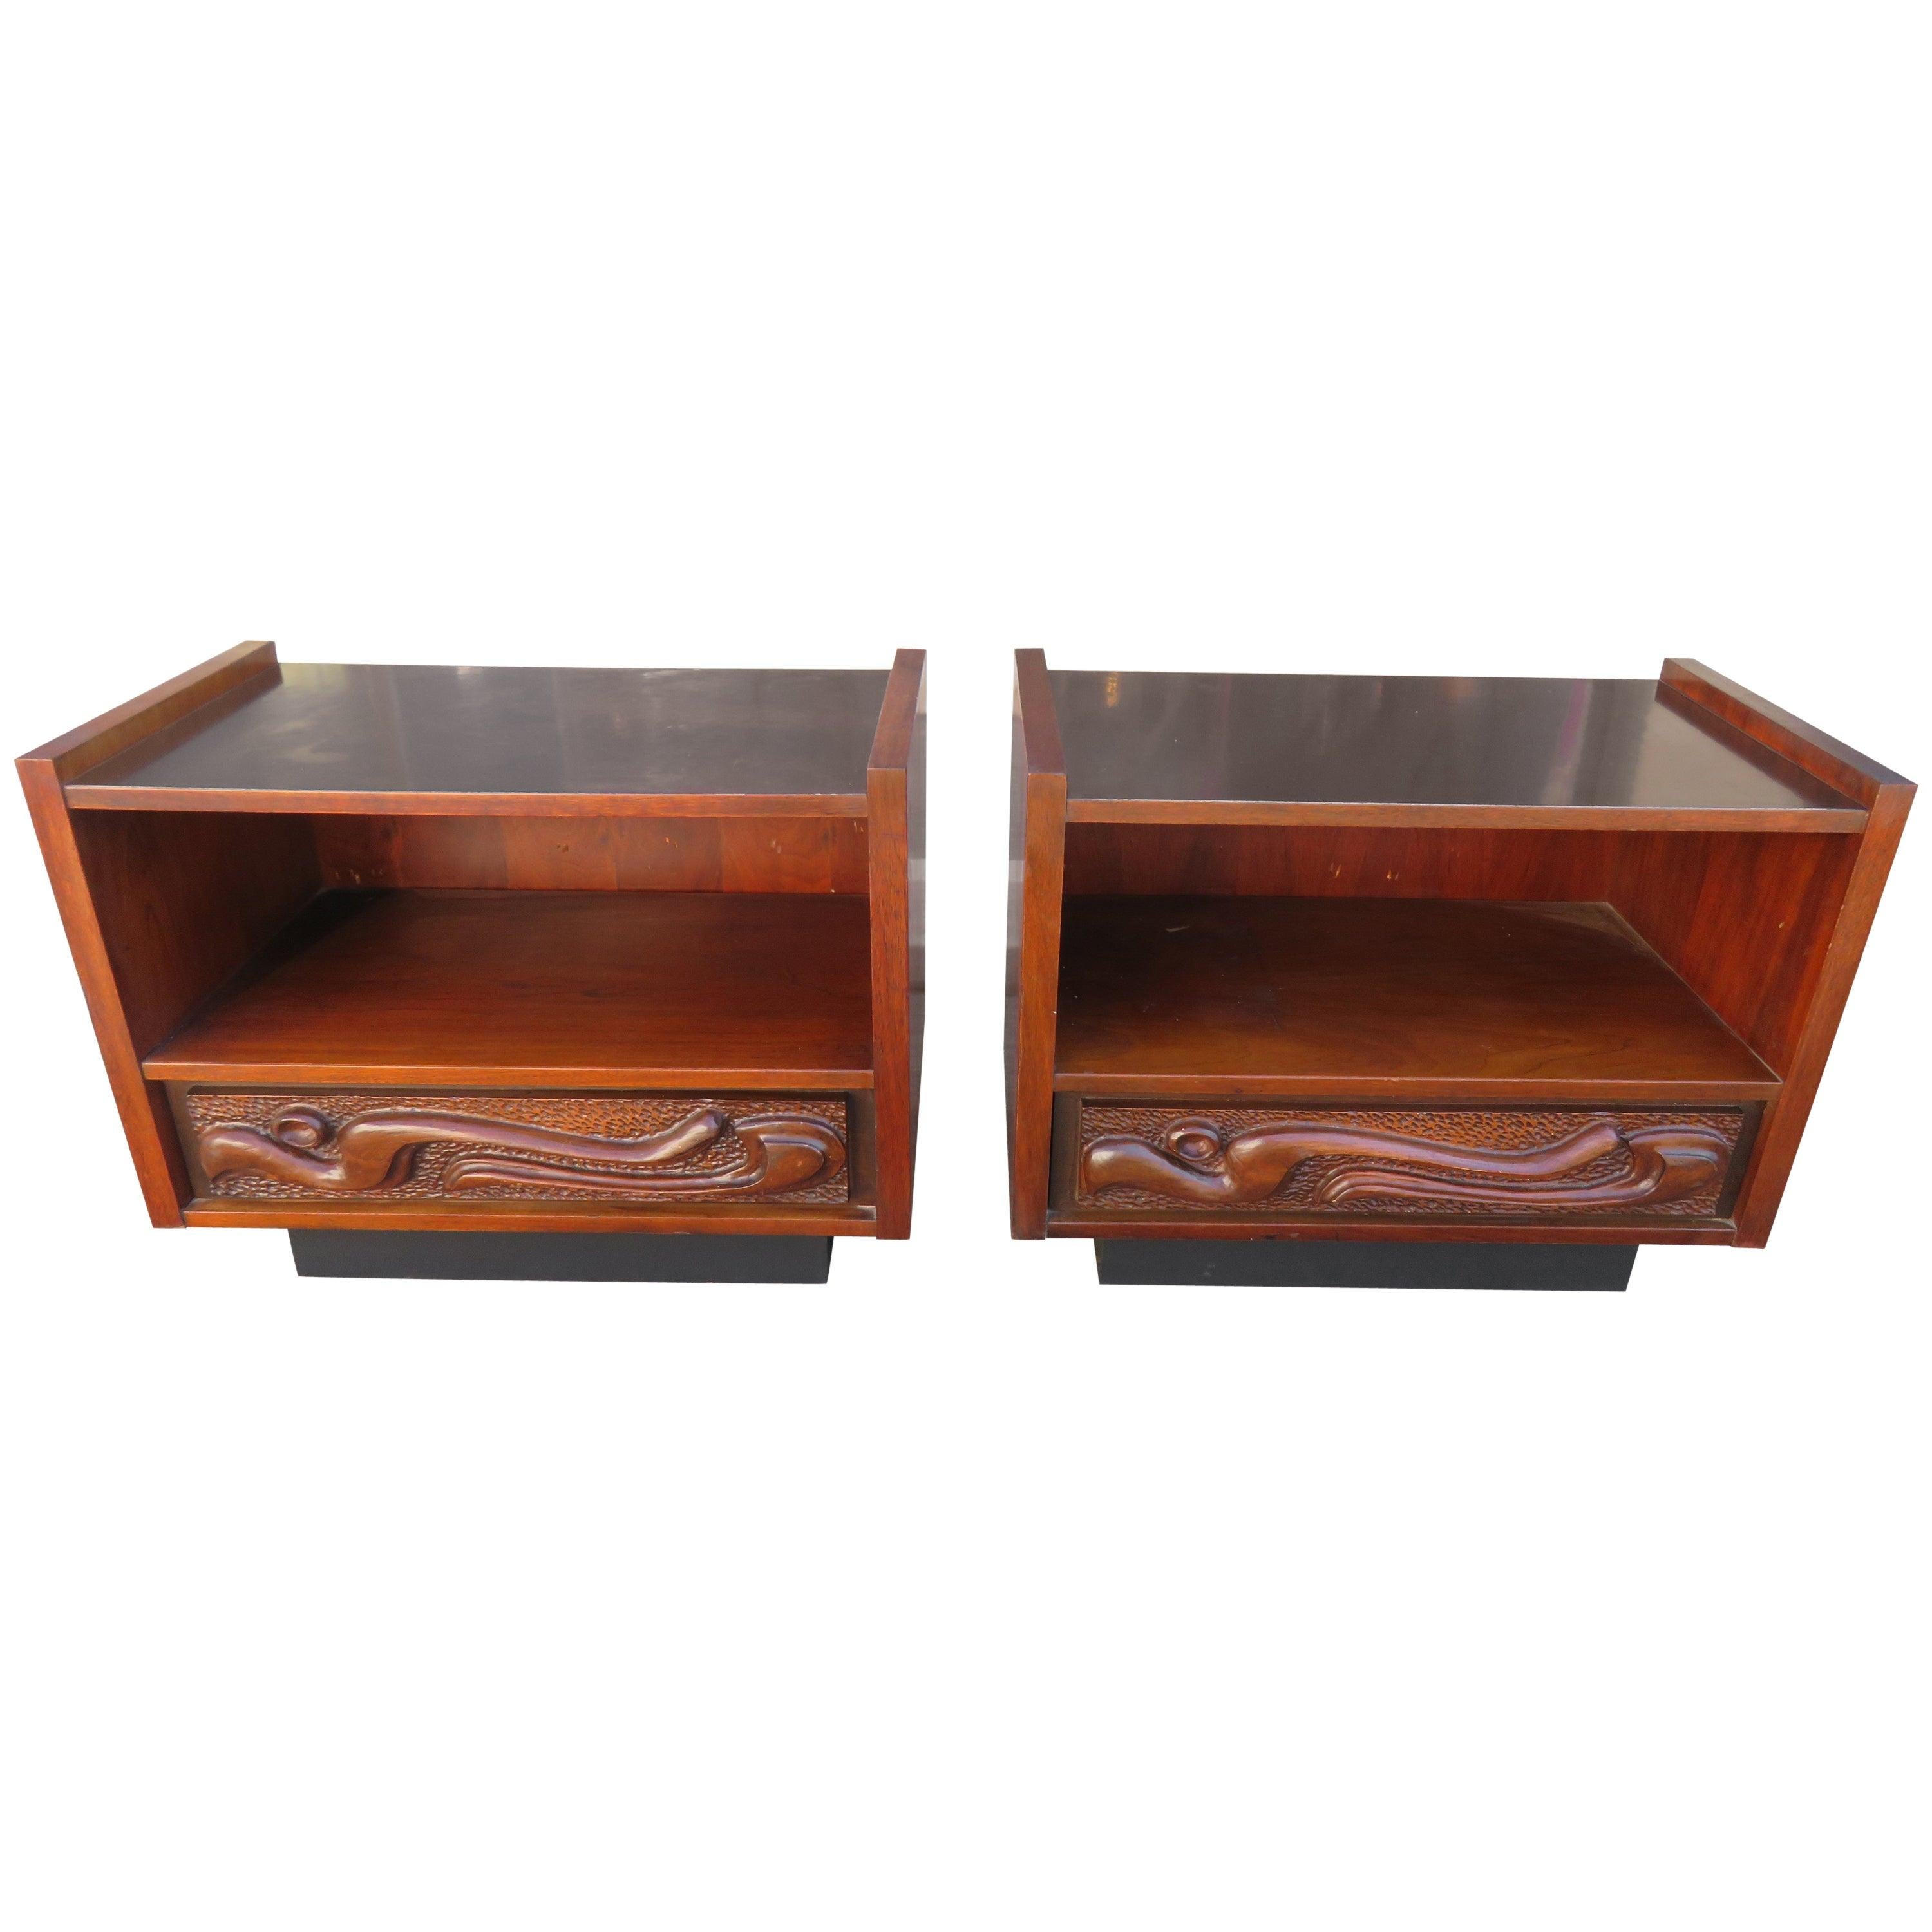 Wonderful Pair of Witco Style Oceanic Sculptural Nightstand by Pulaski